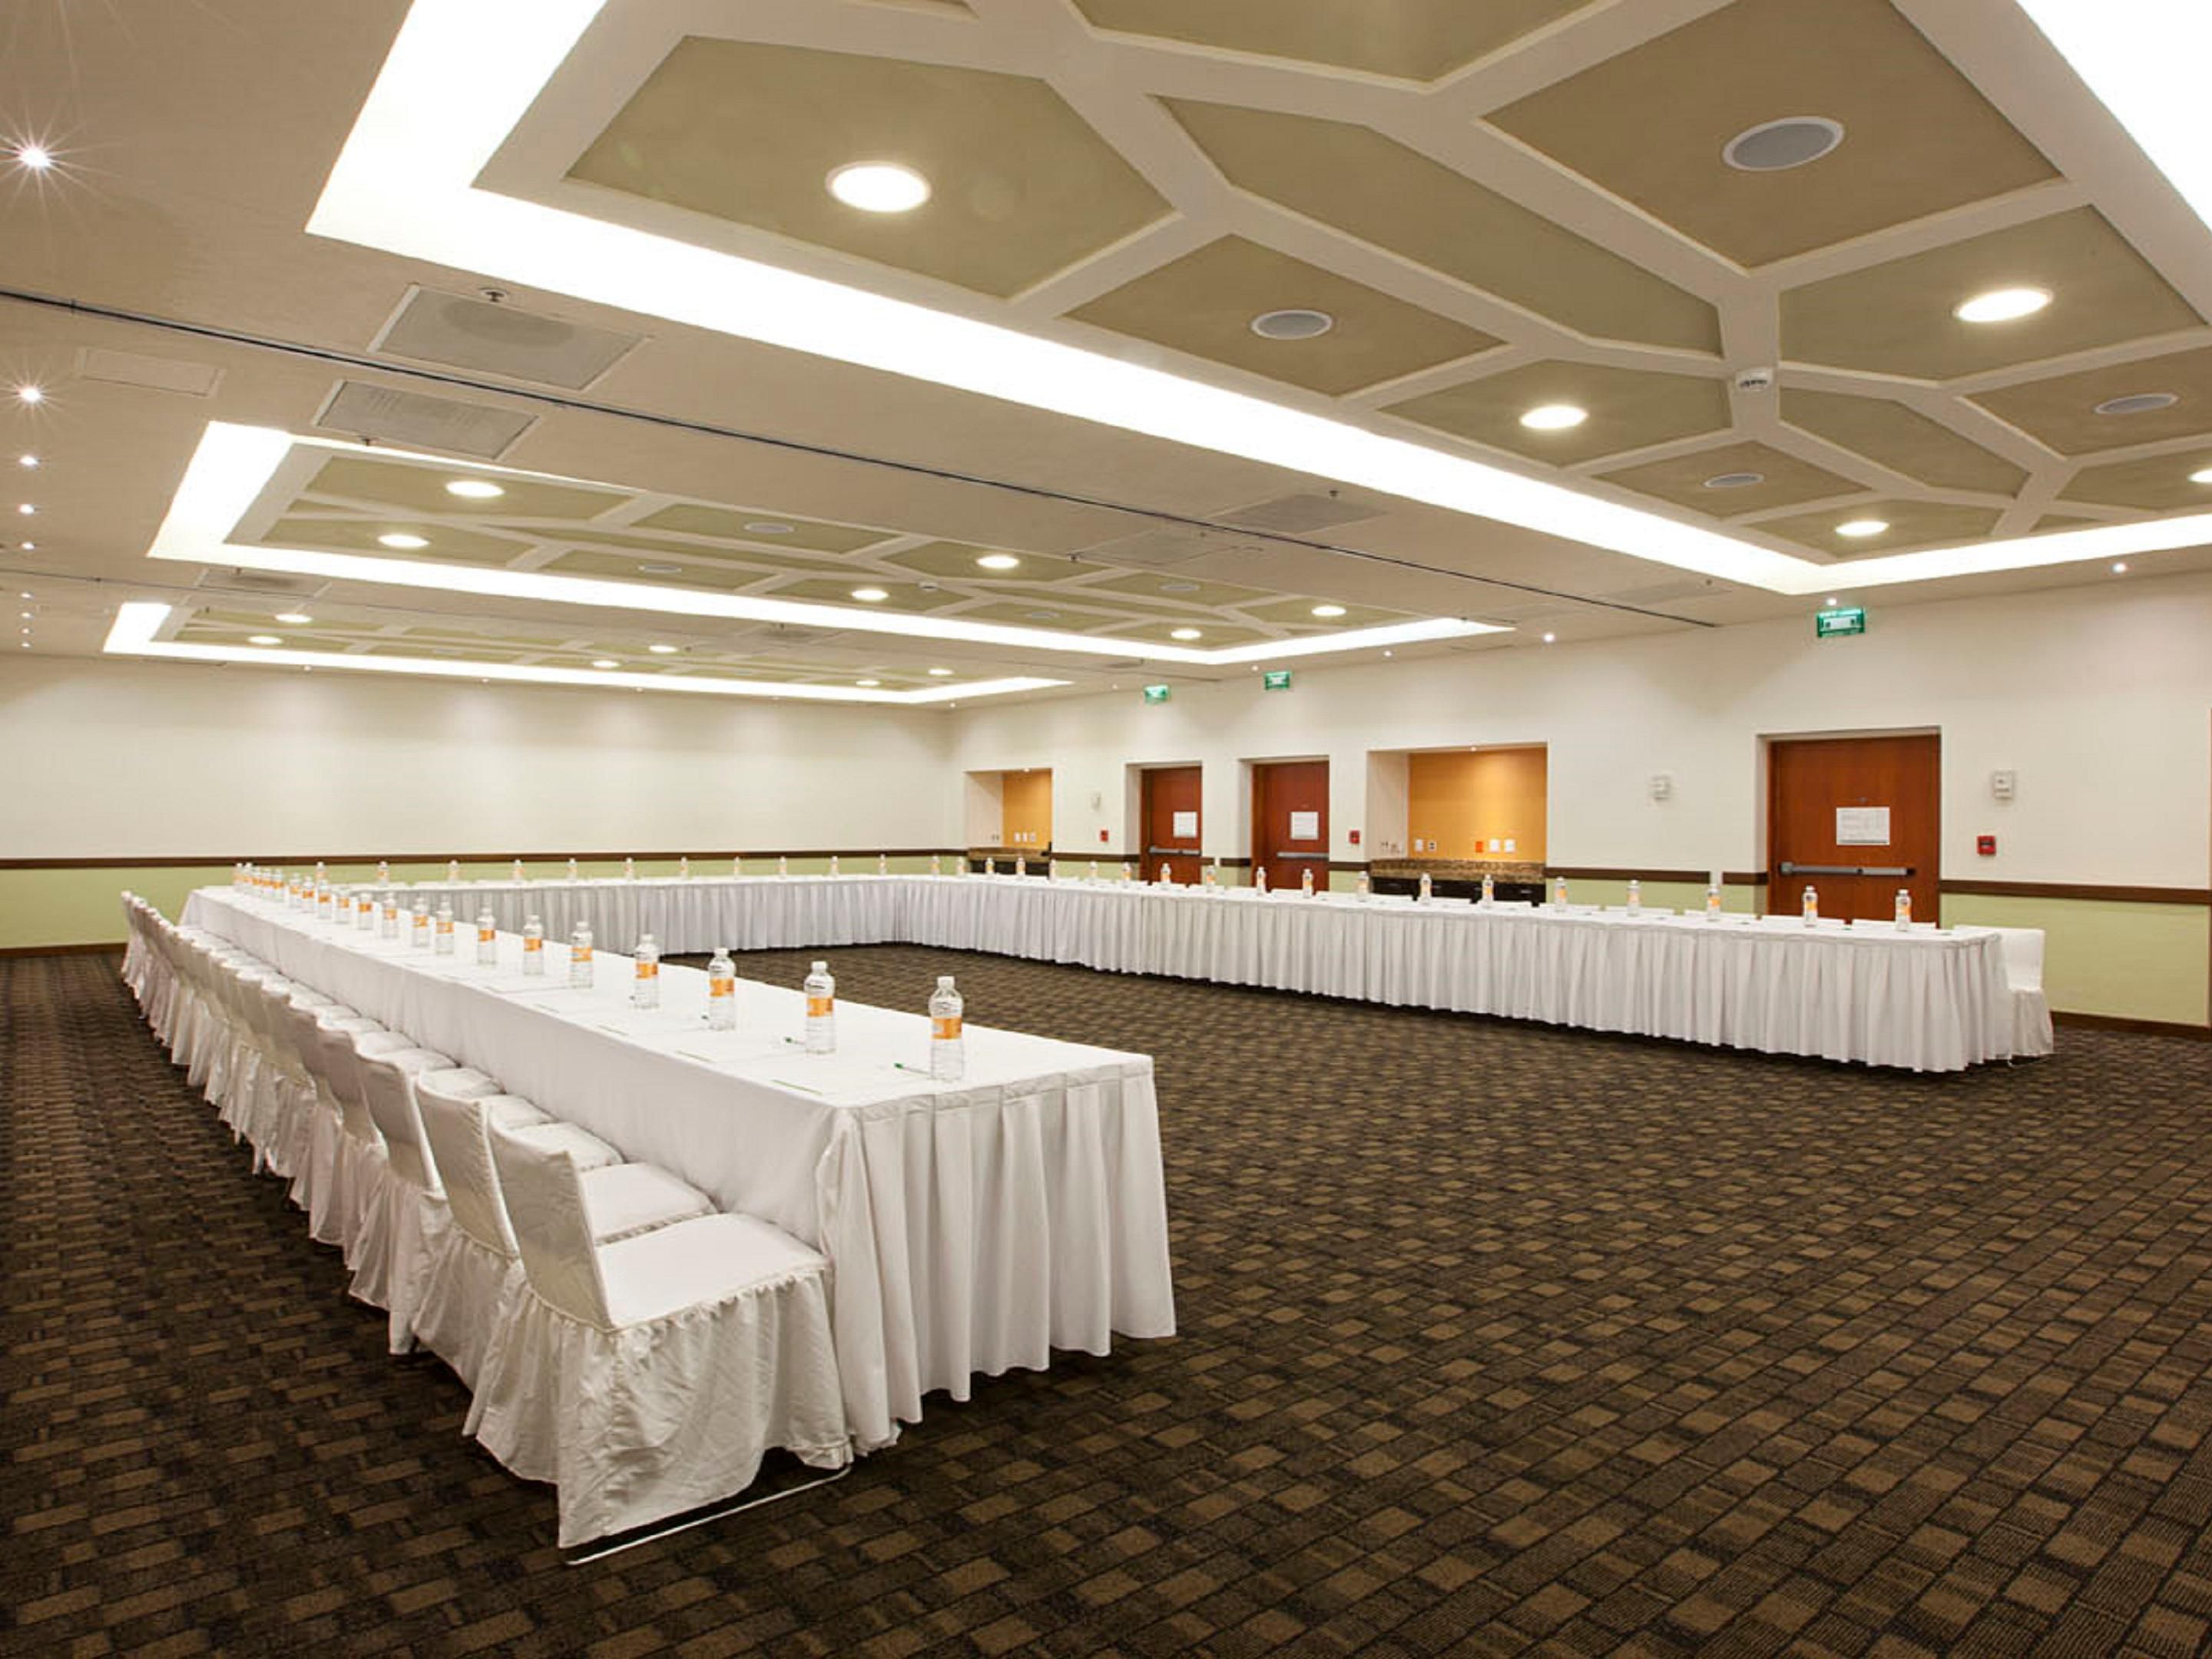 We have the perfect meeting room for all your important reunions. Fully equipped with everything you need for your events.